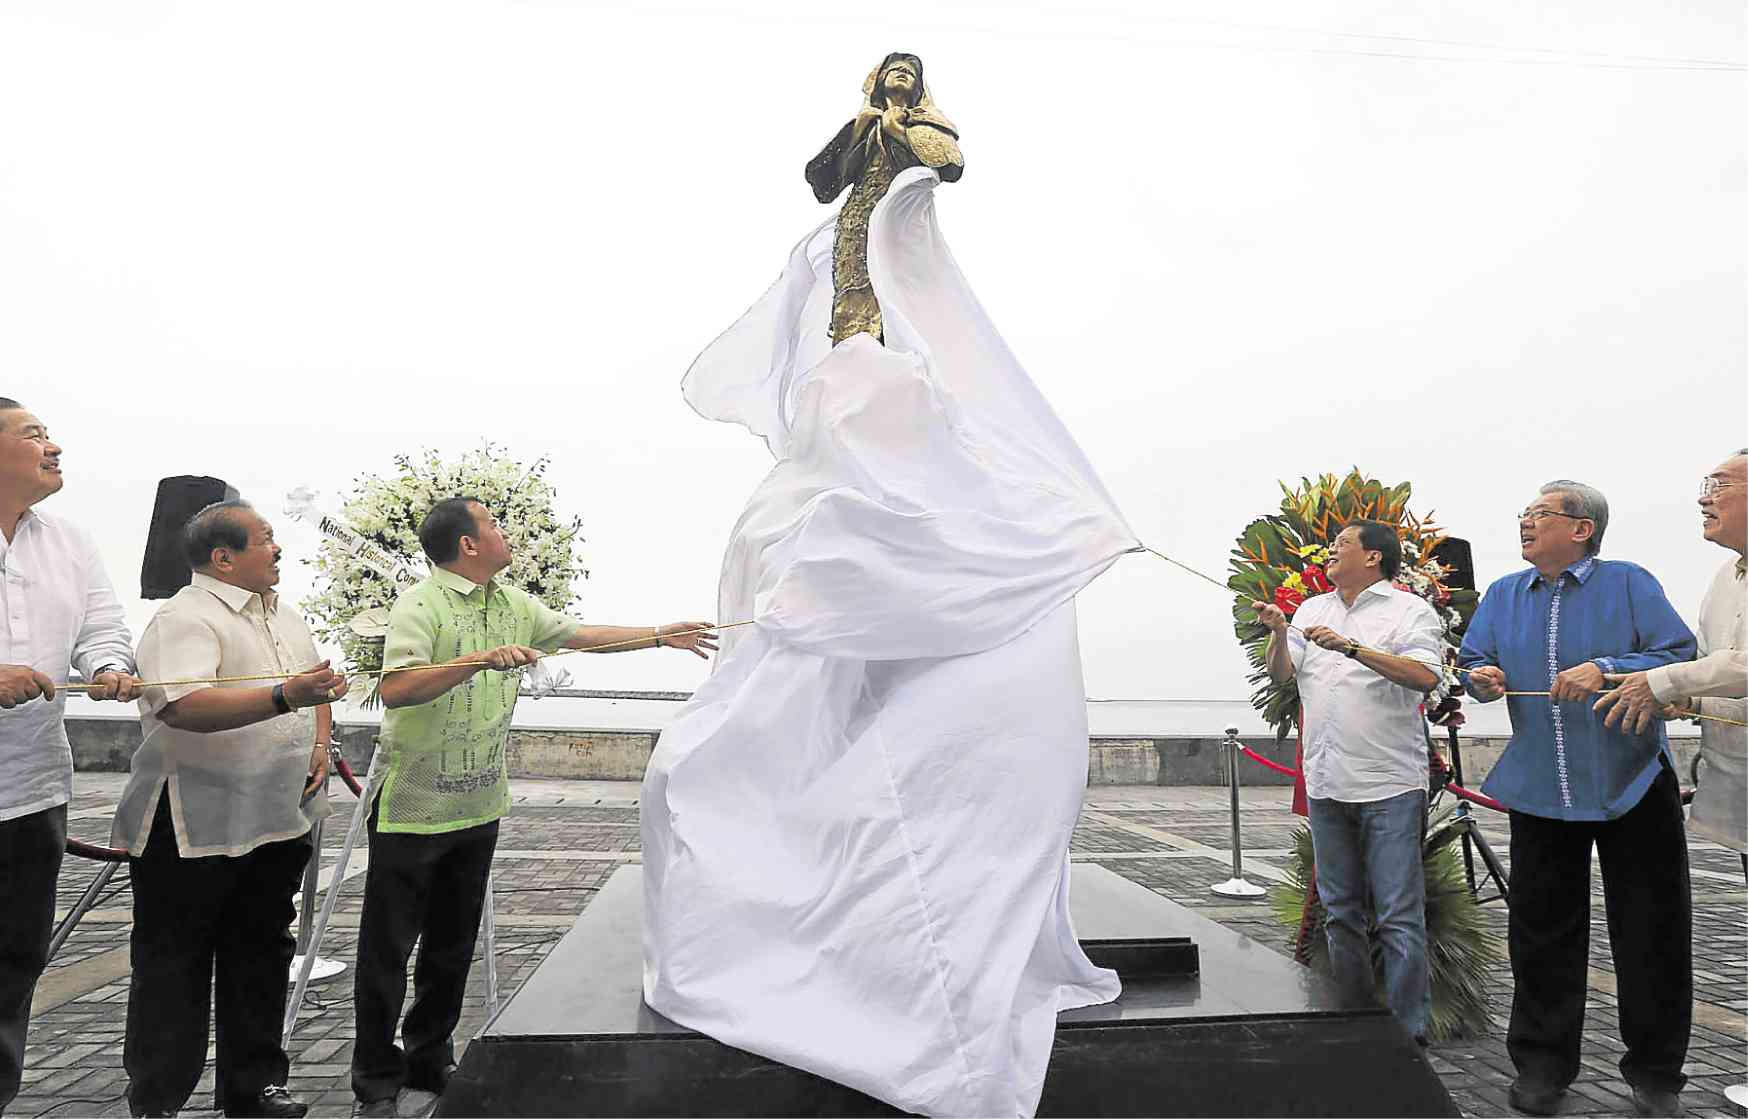 The 7-foot bronze comfort woman statue unveiled on Dec. 8 on Roxas Boulevard sent Japanese embassy officials inquiring at Manila City Hall and the Department of Foreign Affairs seeking an explanation from local officials. —MARIANNE BERMUDEZ